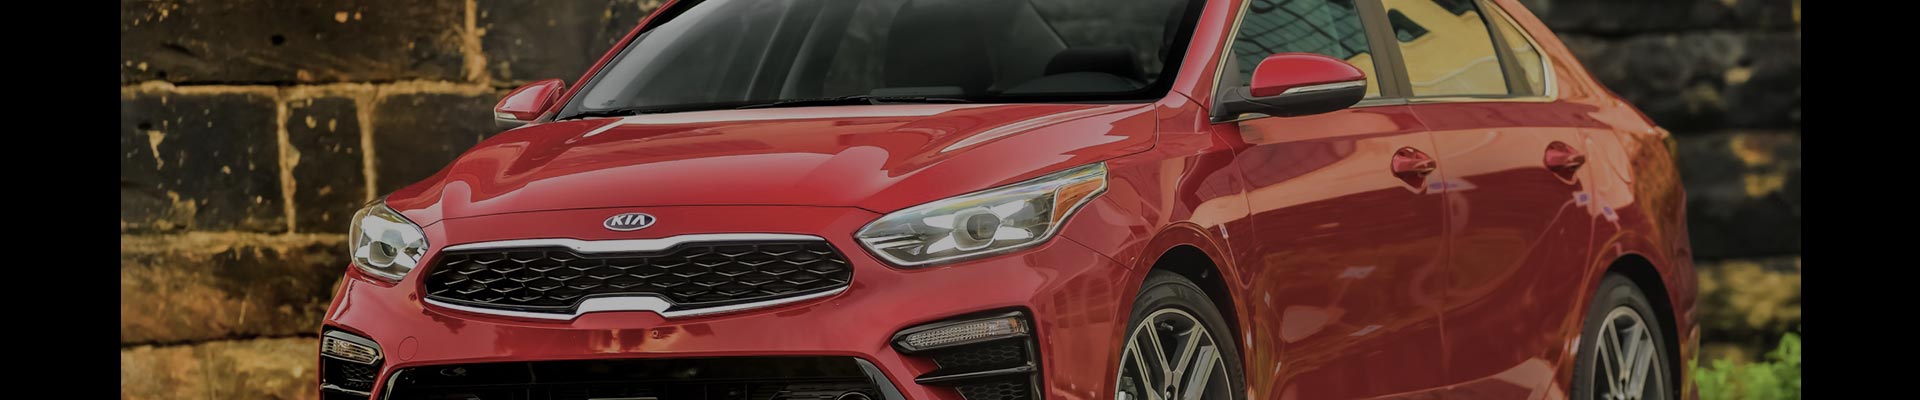 Shop Replacement and OEM 2017 Kia Forte Parts with Discounted Price on the Net